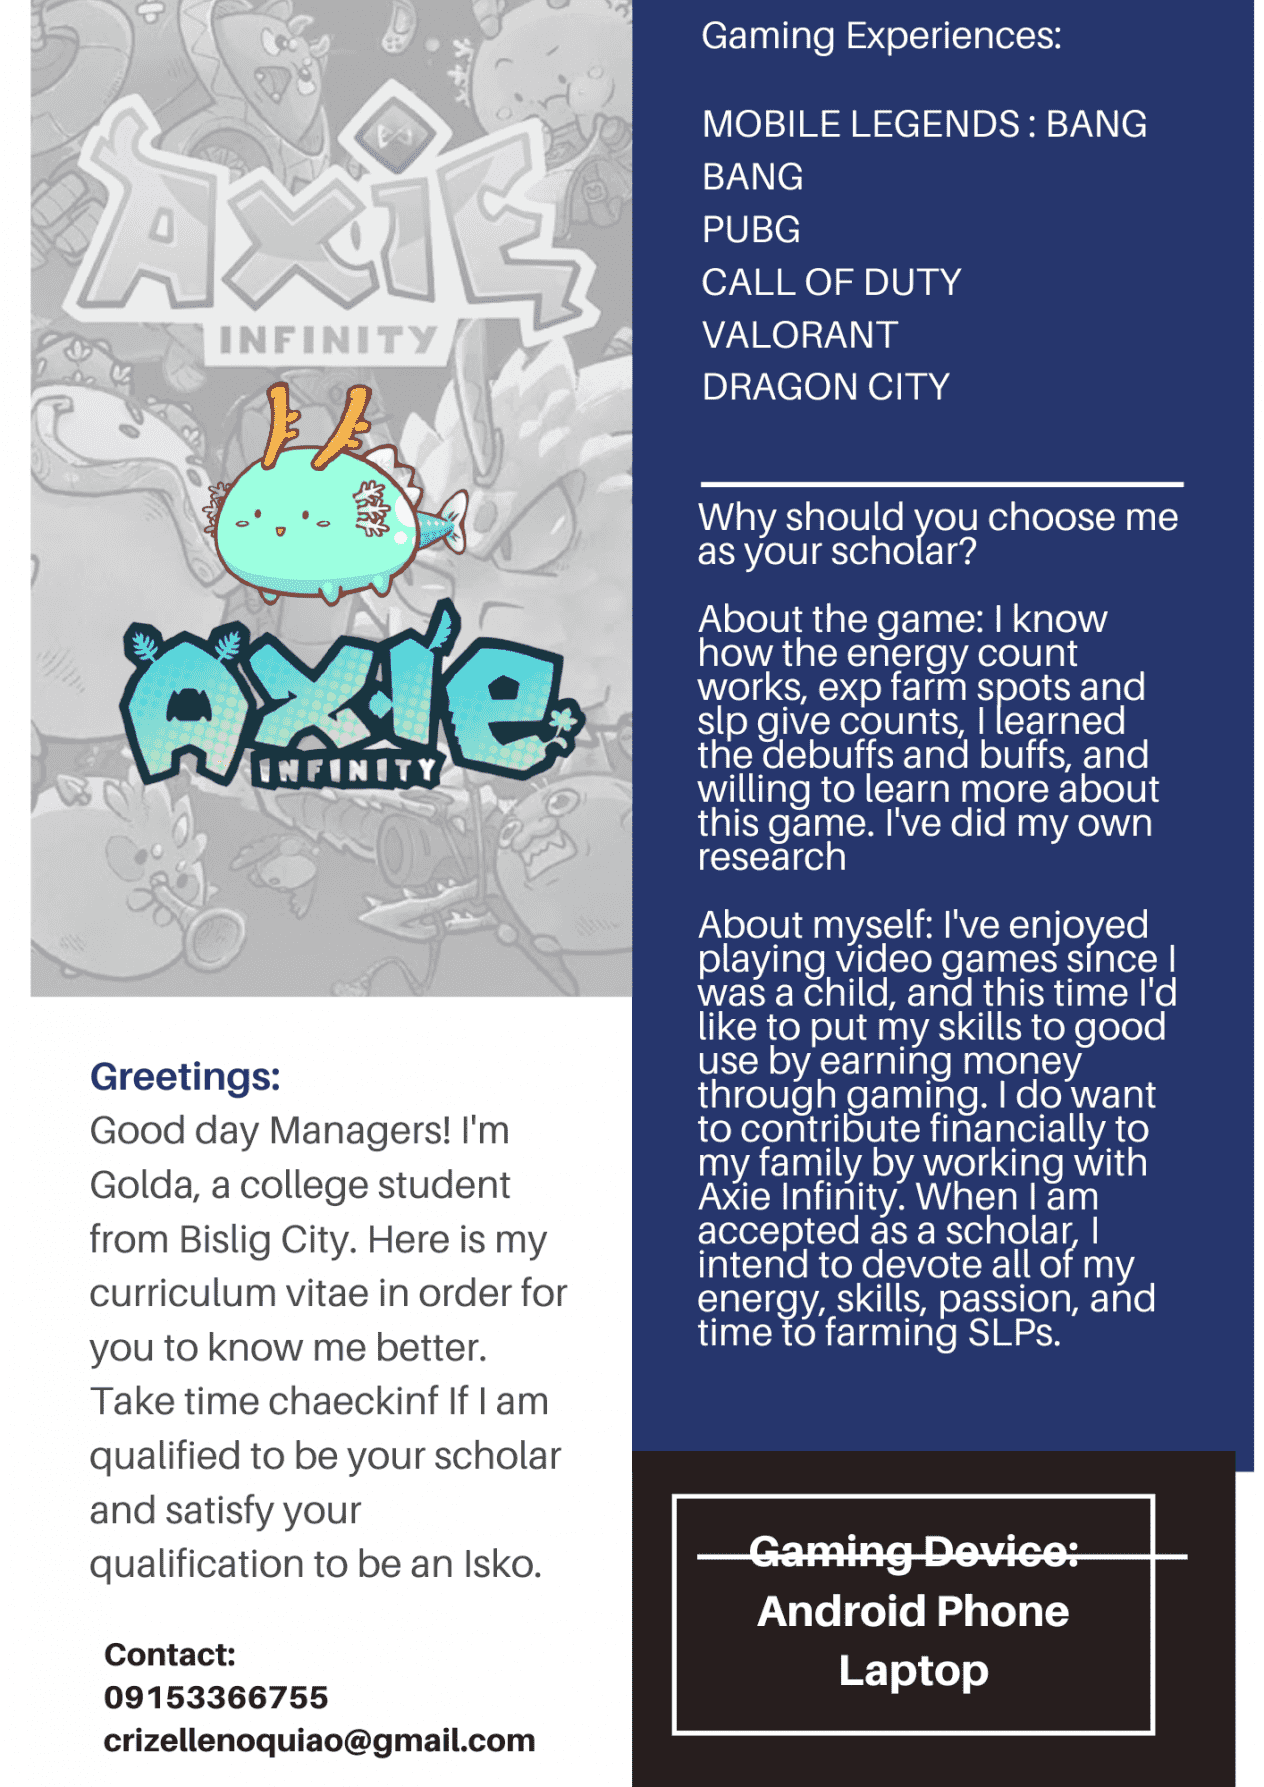 Applying to be Axie Scholar image 1